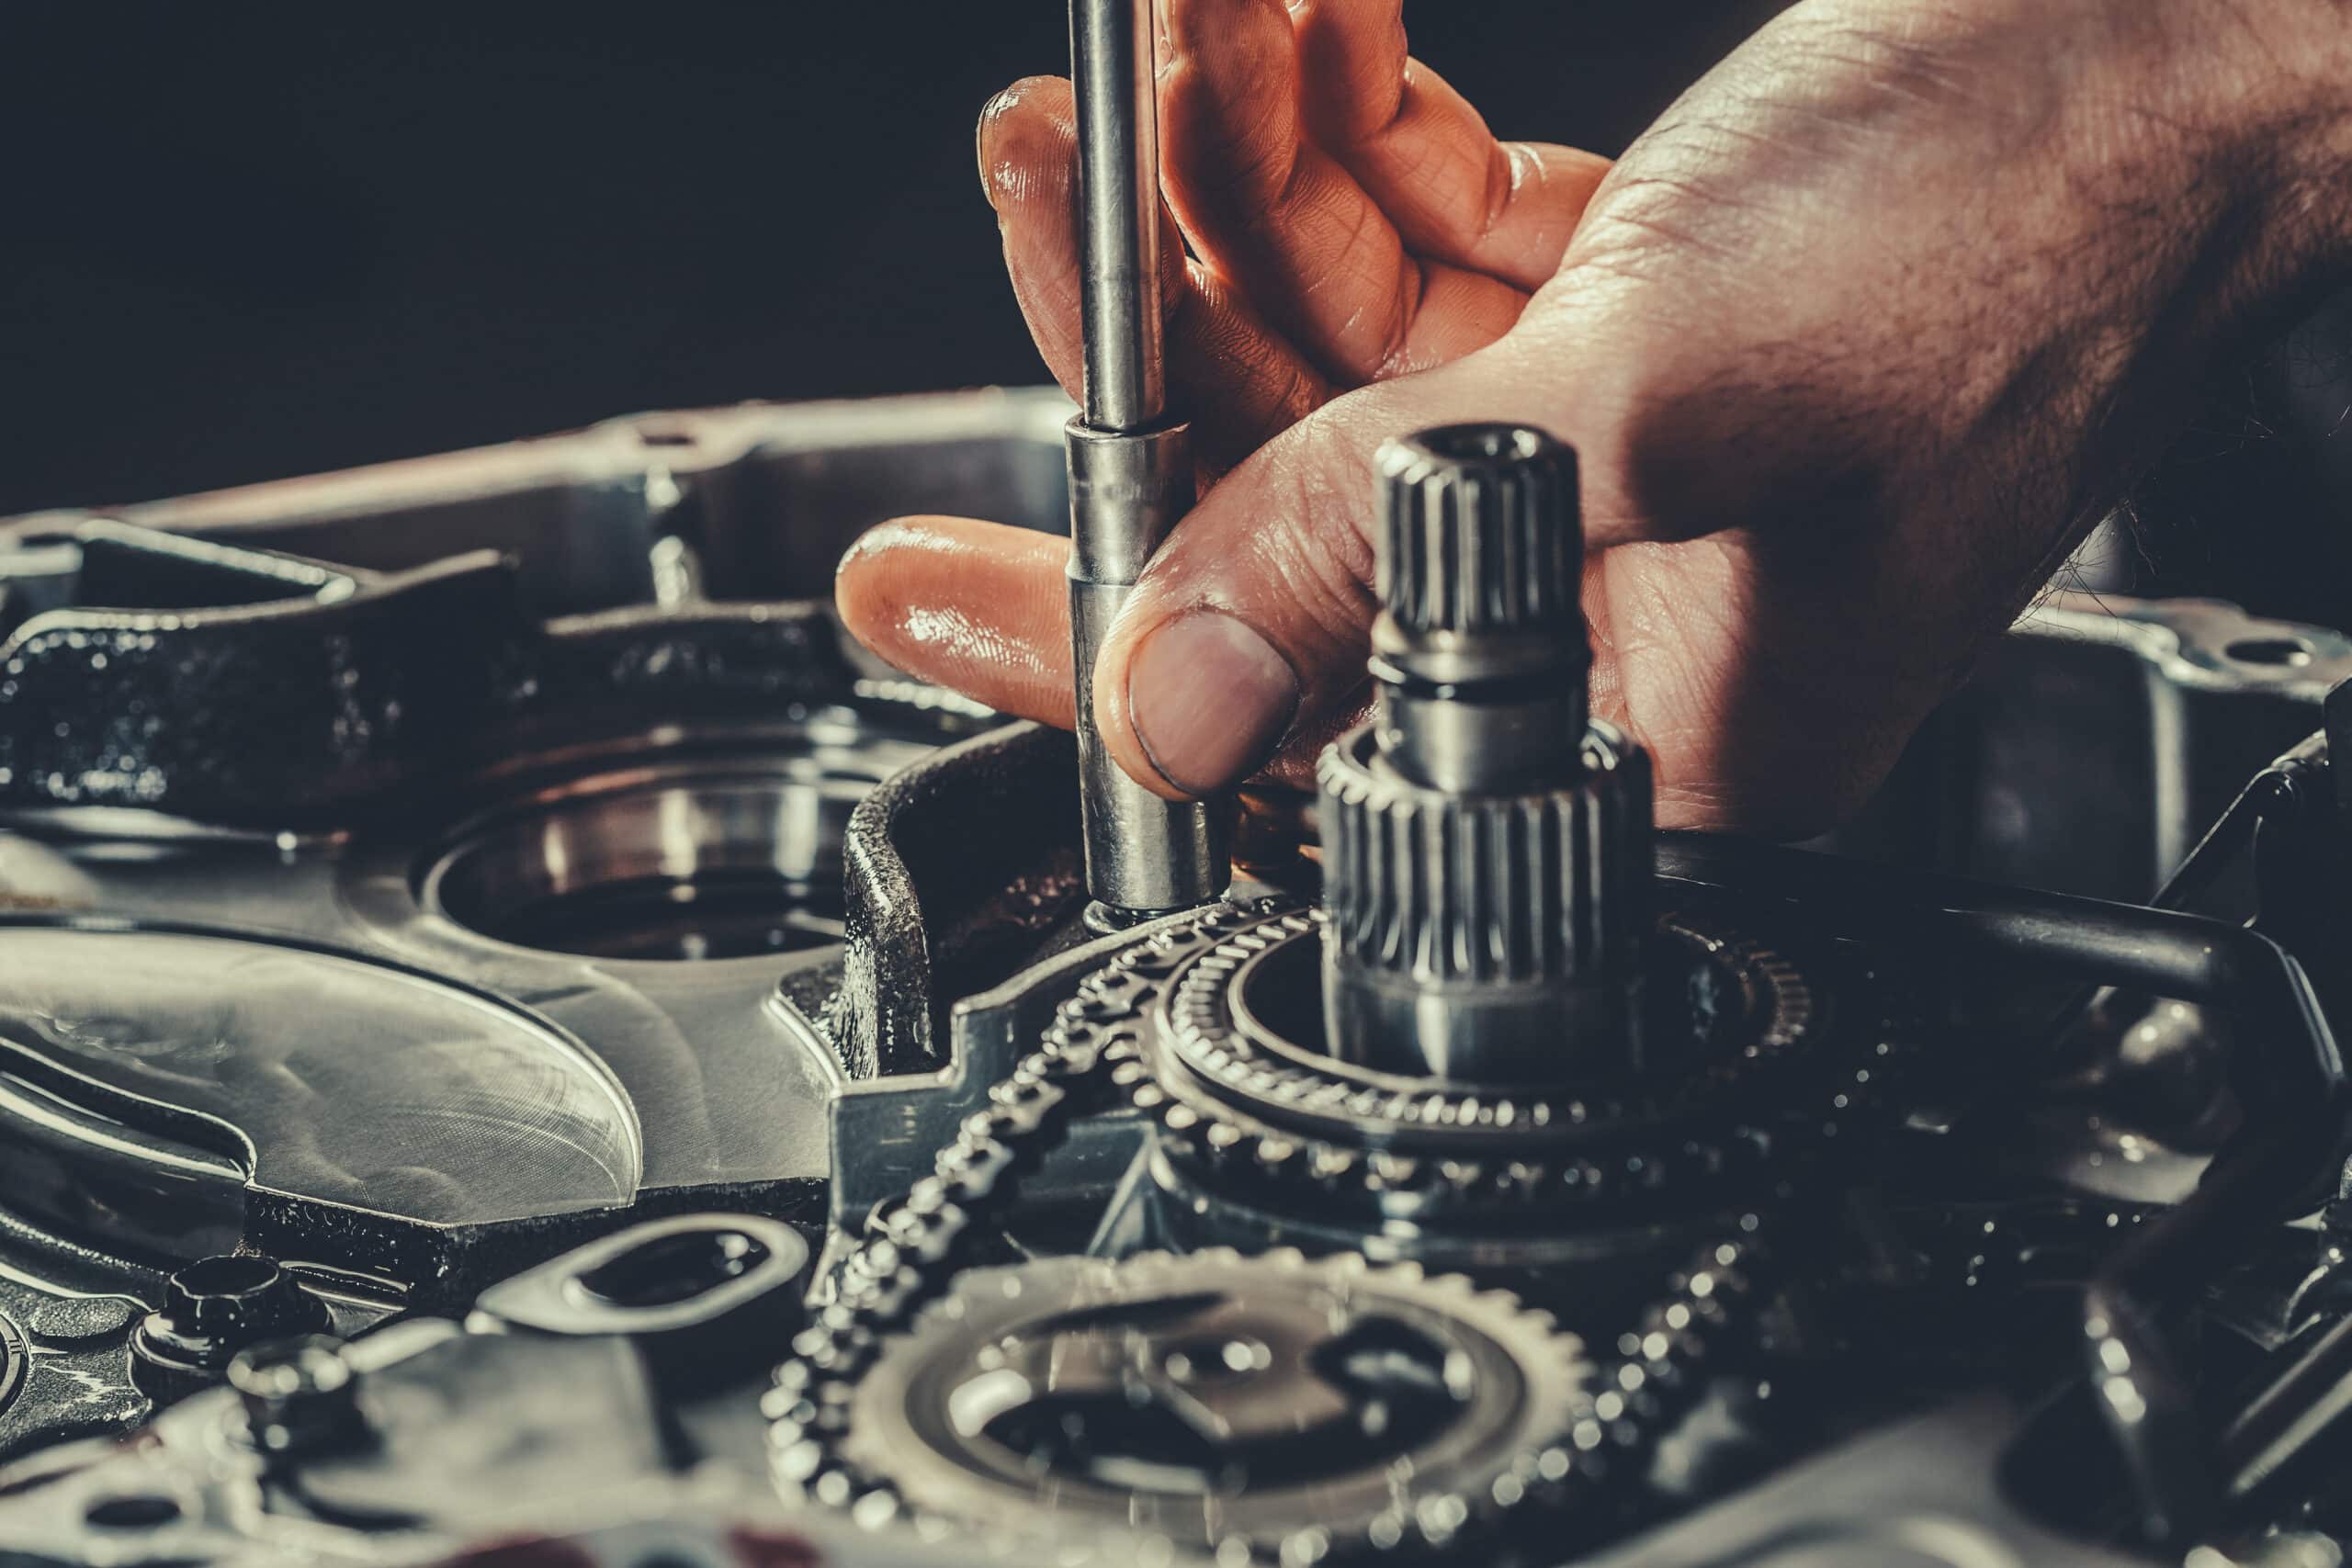 What Is a Transmission Service, and Is It Necessary?